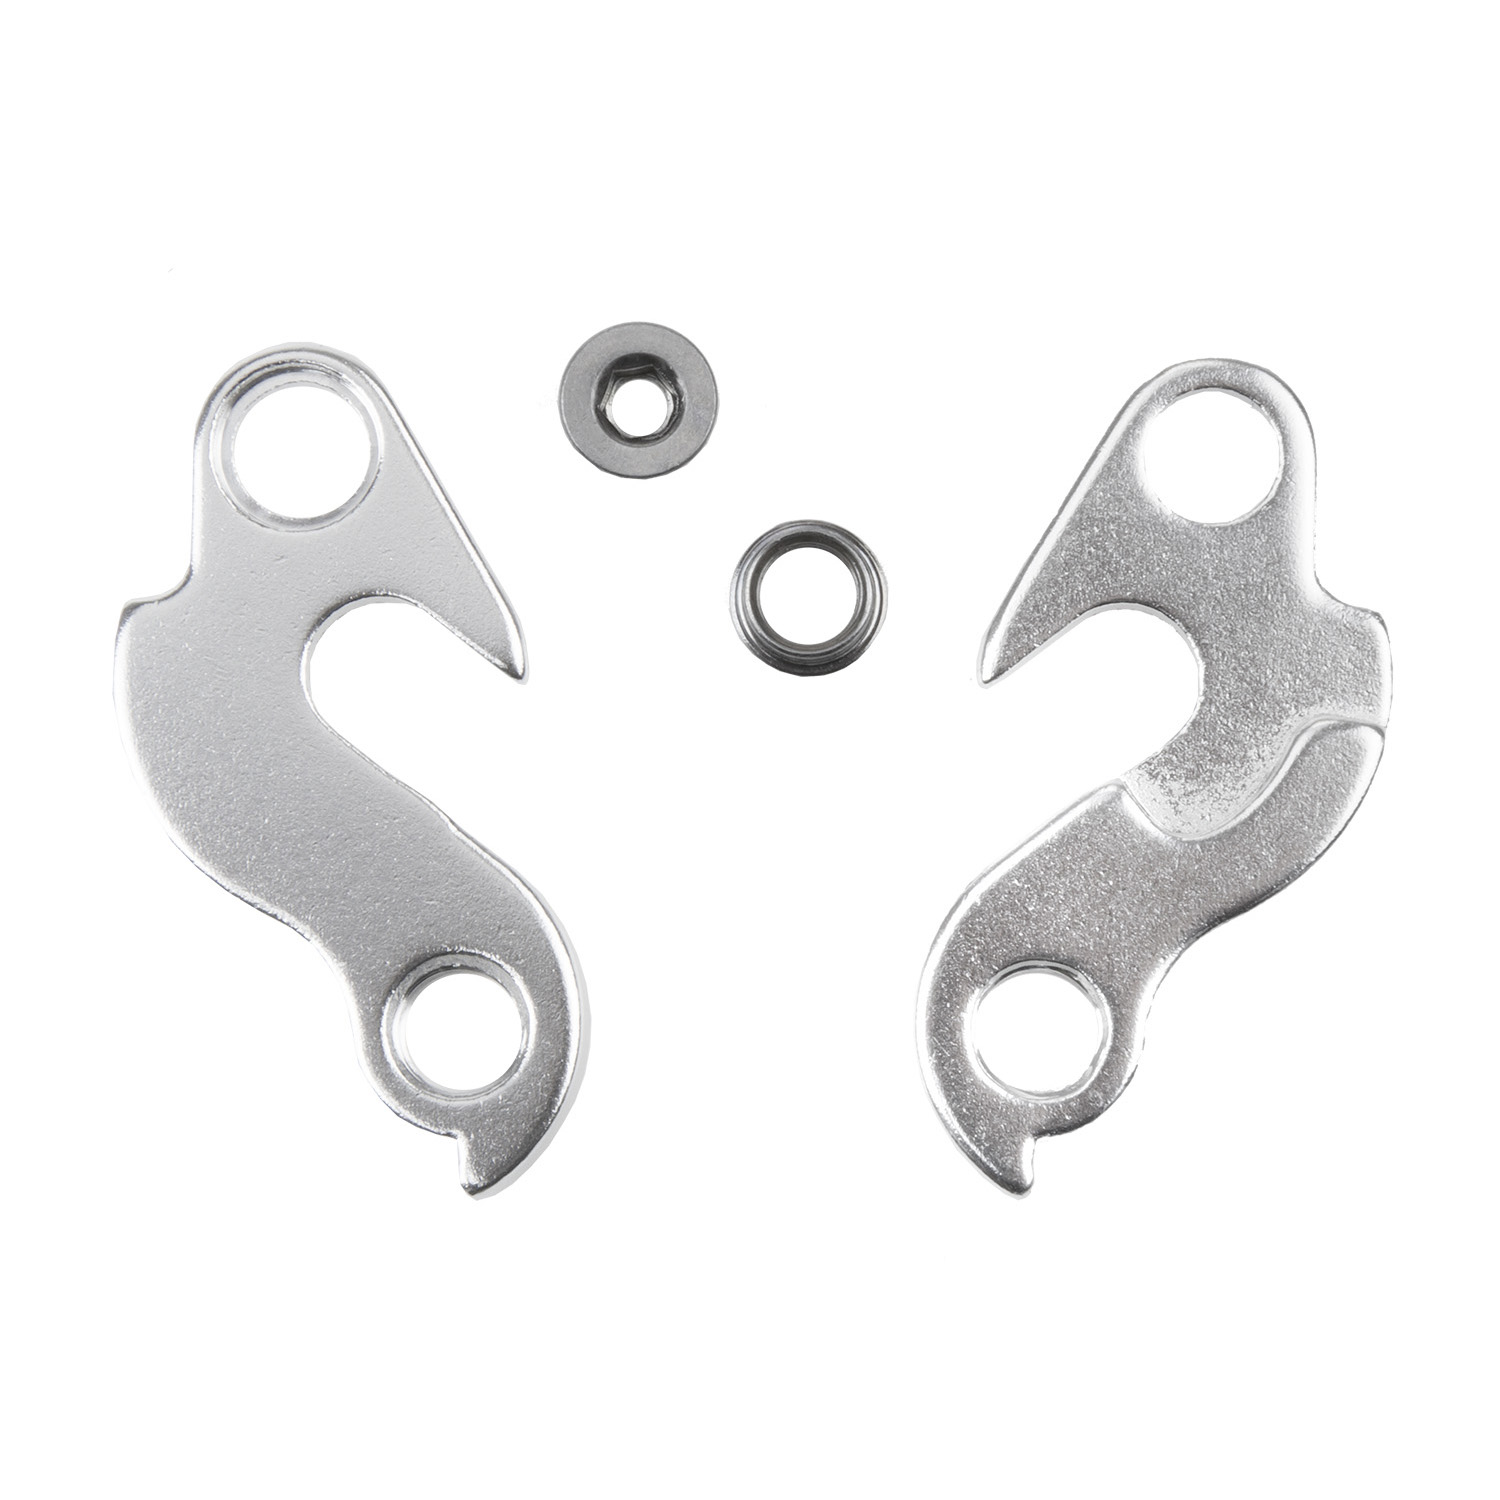 660854 S4 derailleur hanger – AVAILABLE IN SELECTED BIKE SHOPS